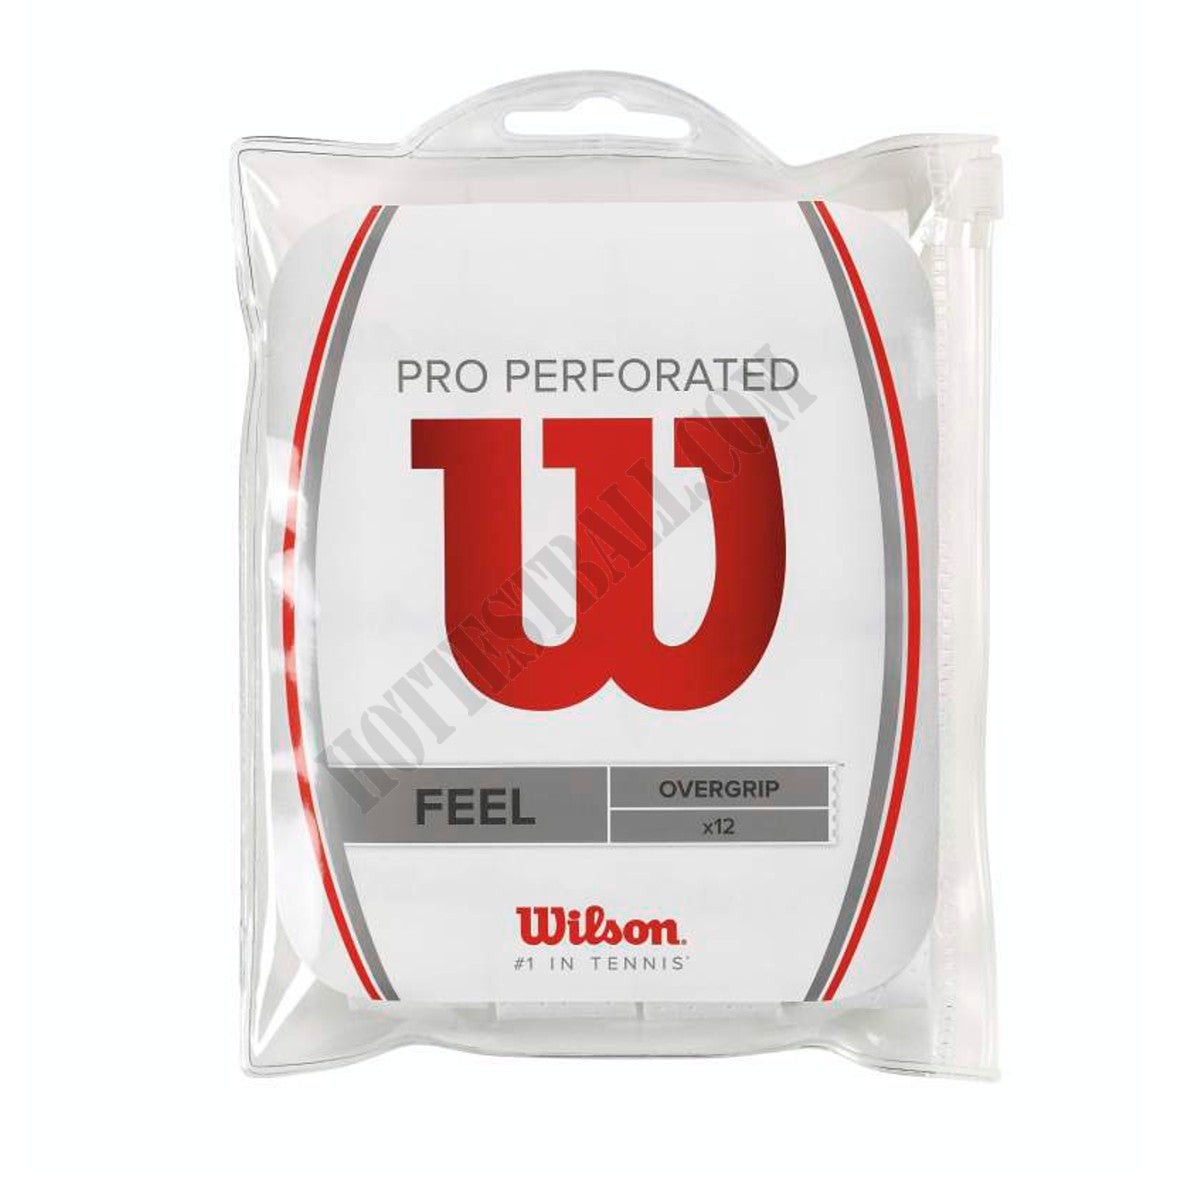 Pro Overgrip Perforated White - 12 Pack - Wilson Discount Store - Pro Overgrip Perforated White - 12 Pack - Wilson Discount Store